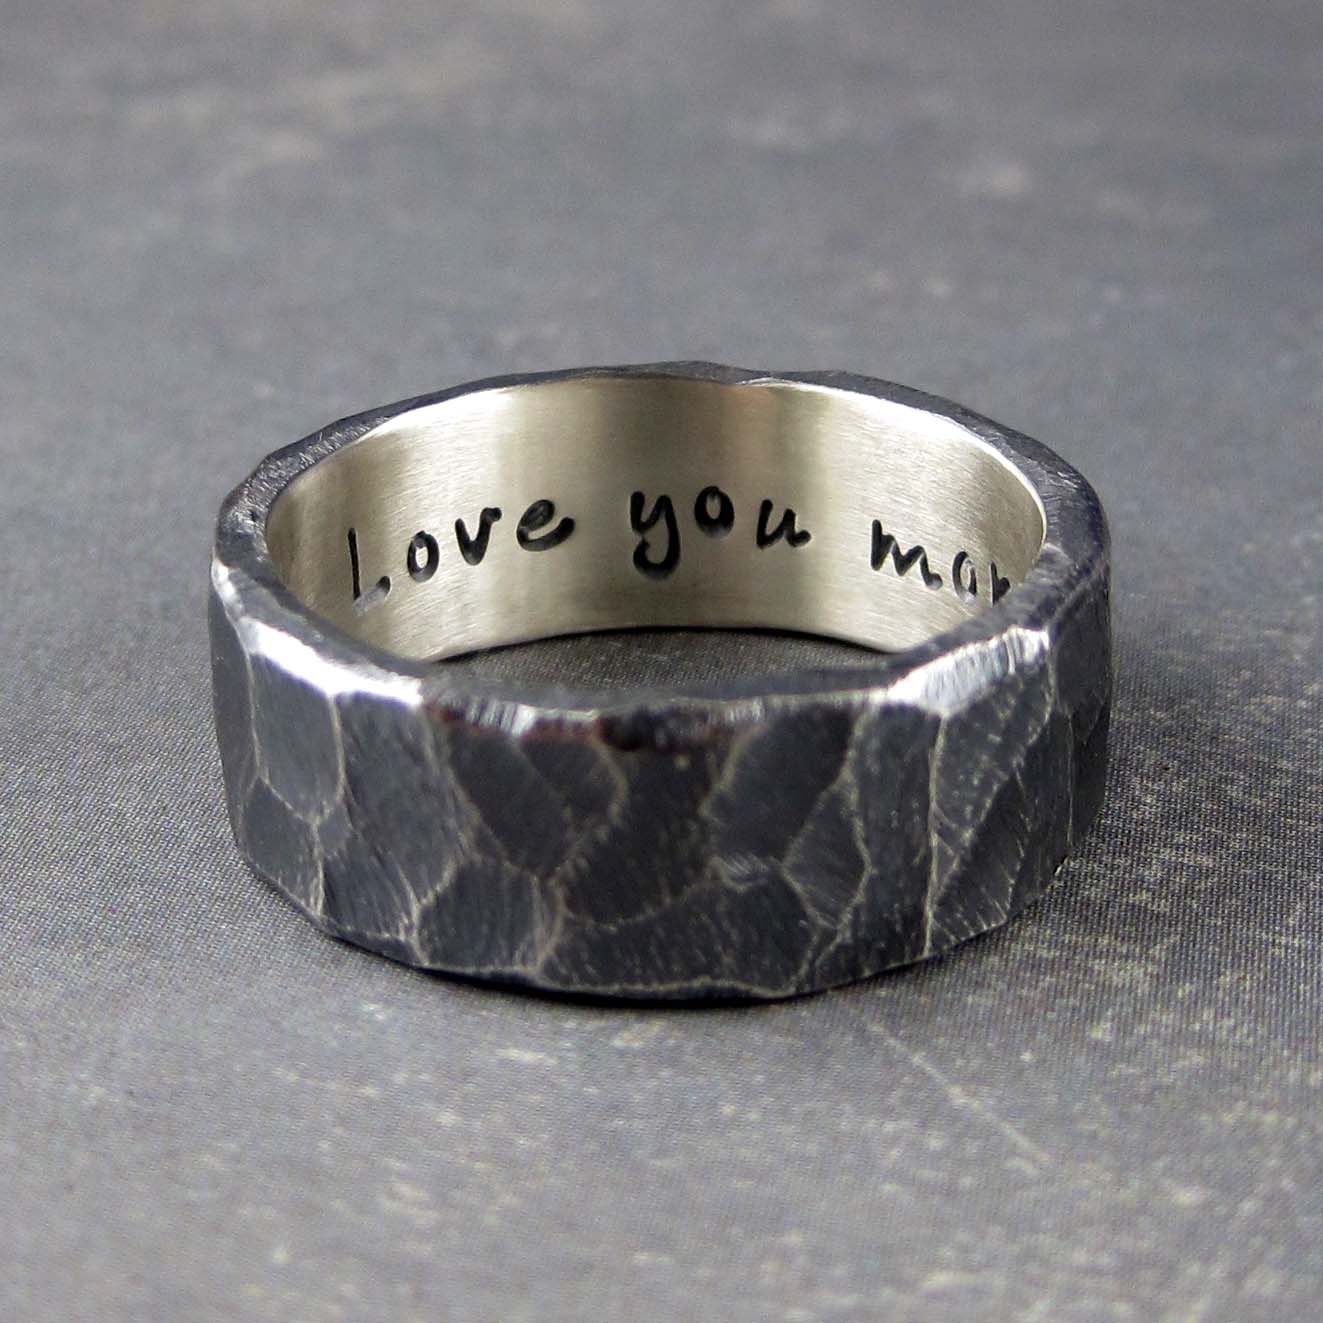 Personalized mens wedding band